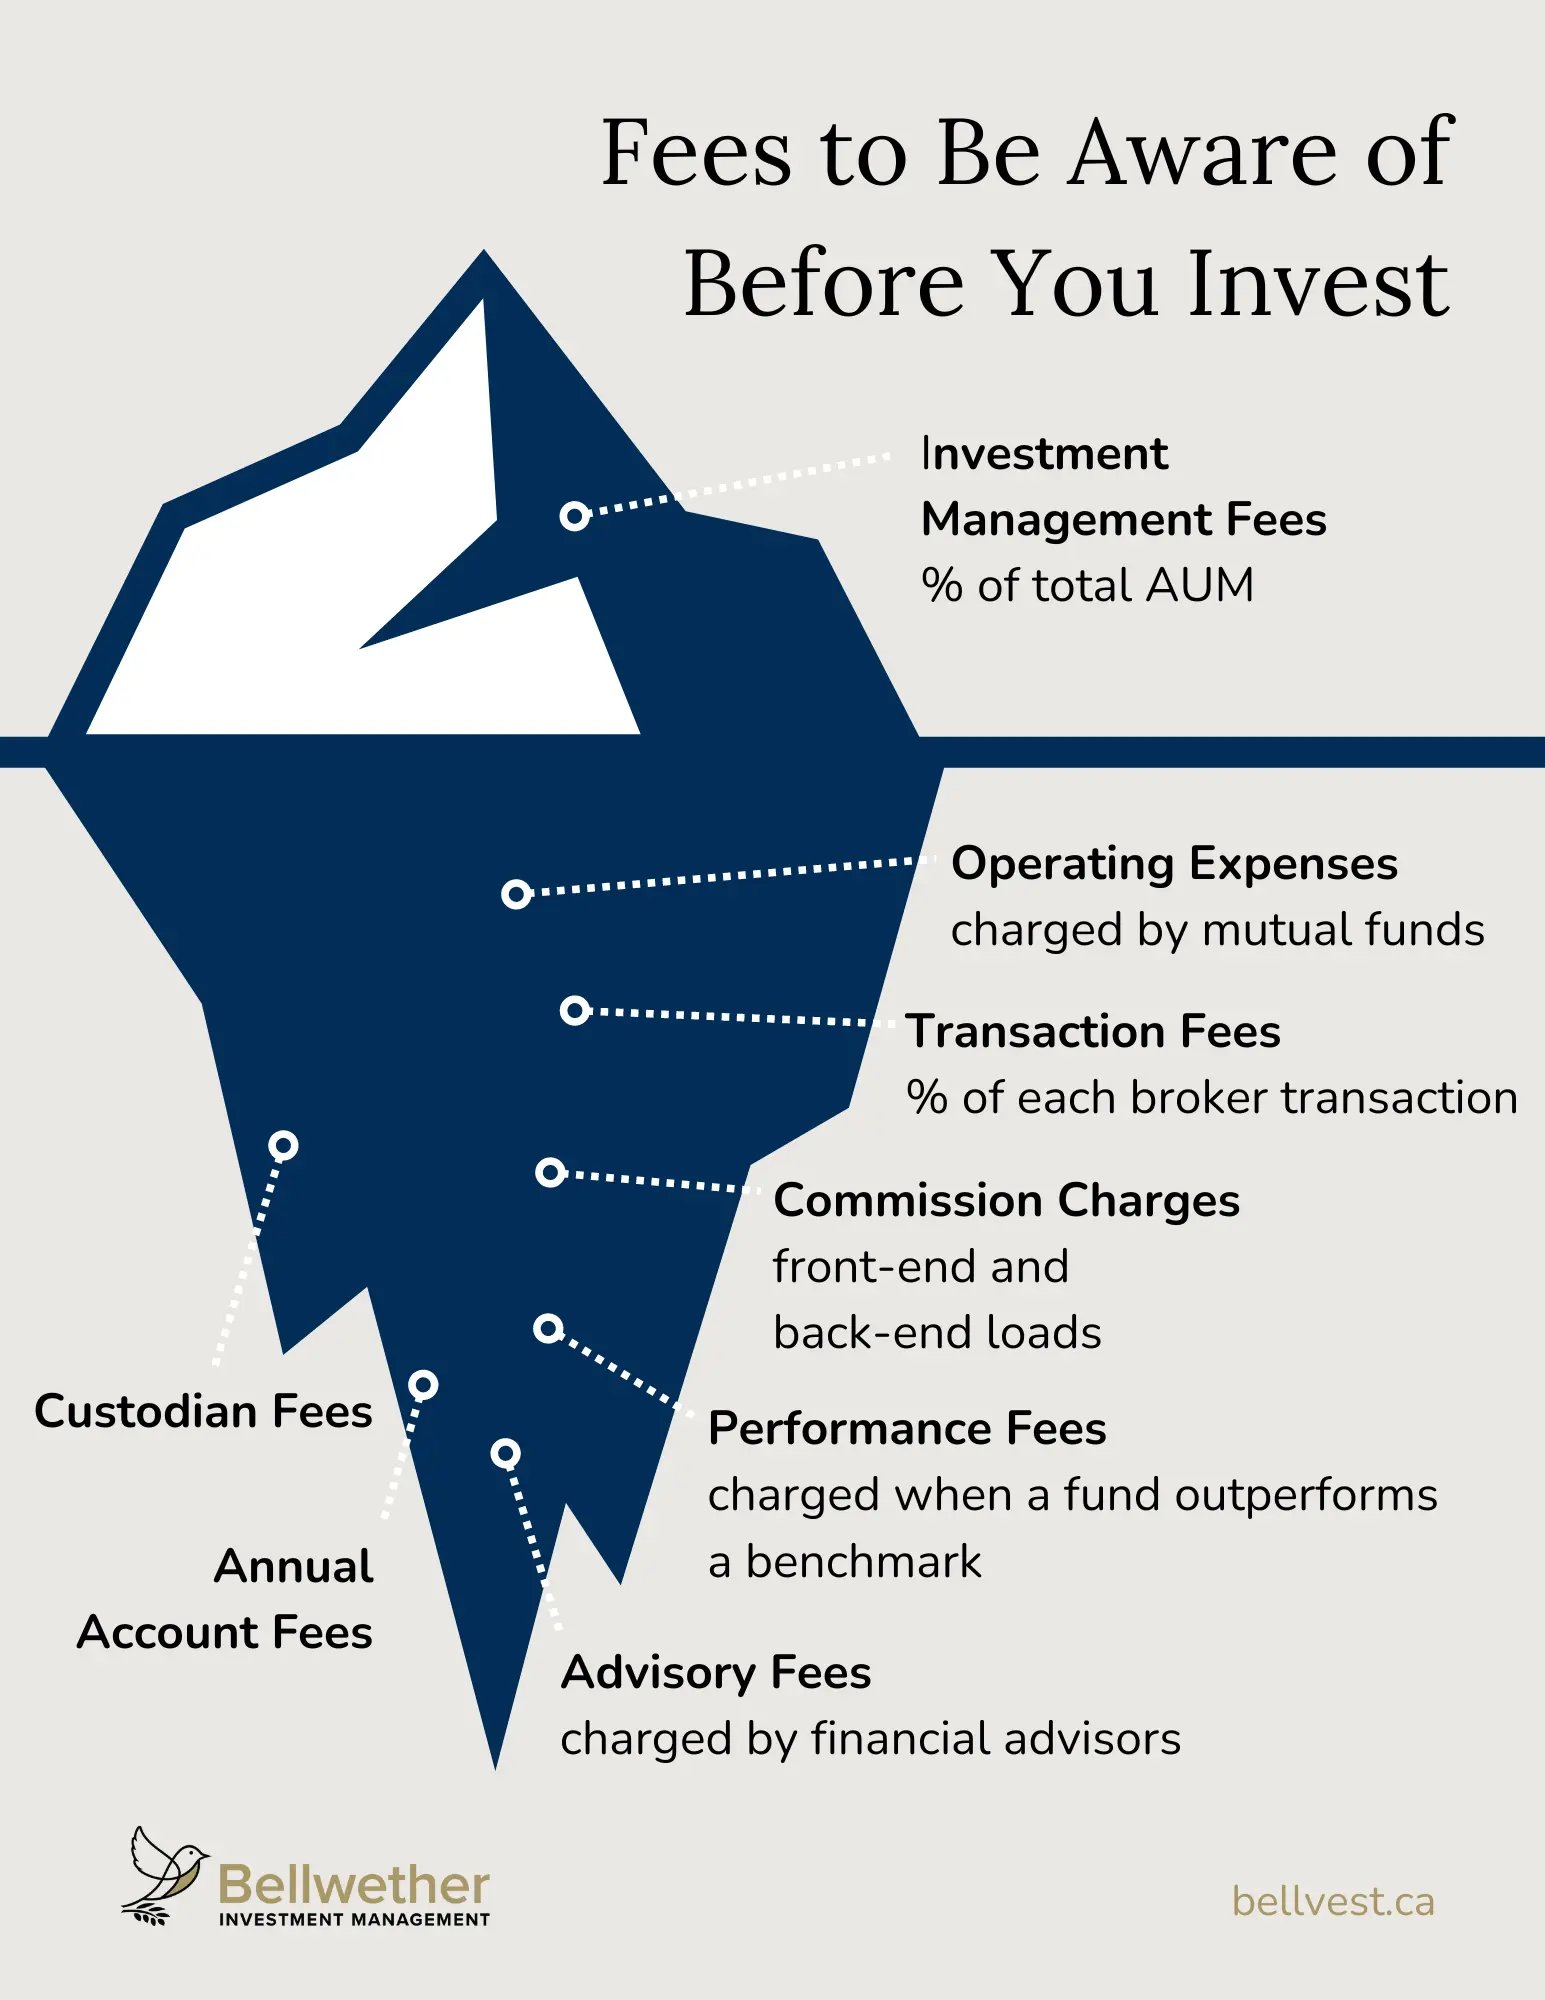 Representation of fees investors can expect to pay, visualized with an iceberg.